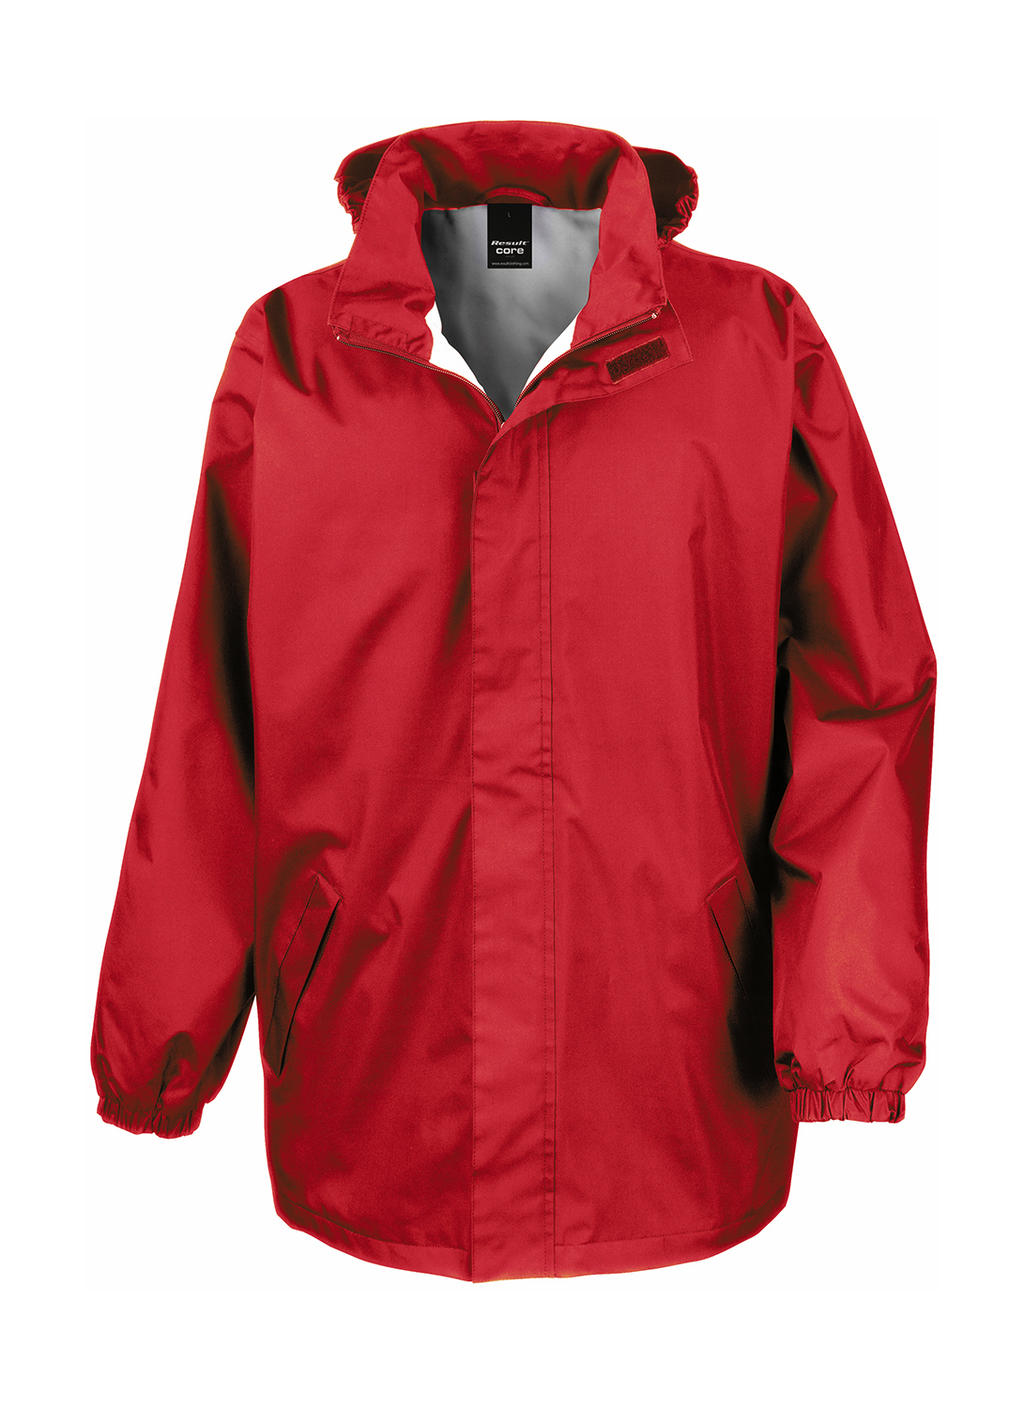  Core Midweight Jacket in Farbe Red